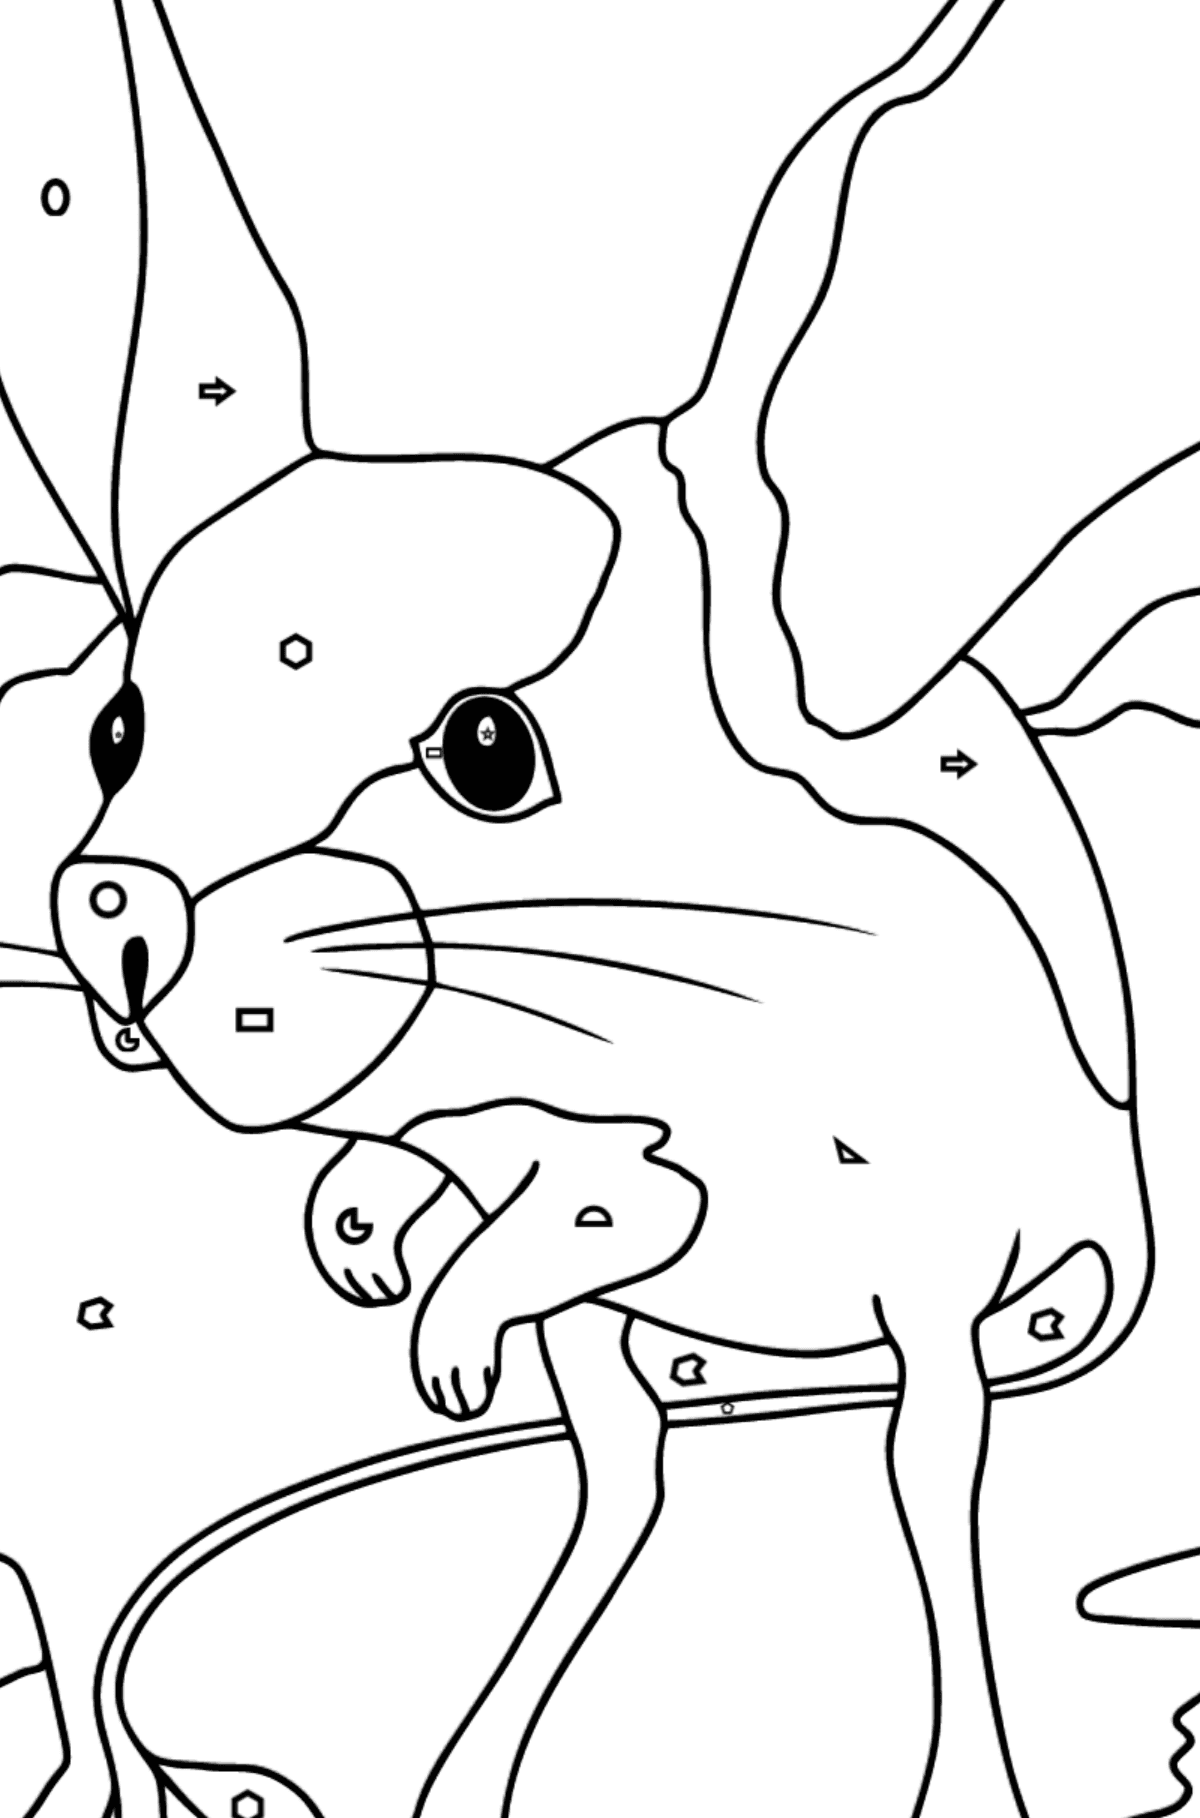 A Jerboa is Inspecting the Area Coloring Page - Coloring by Geometric Shapes for Kids